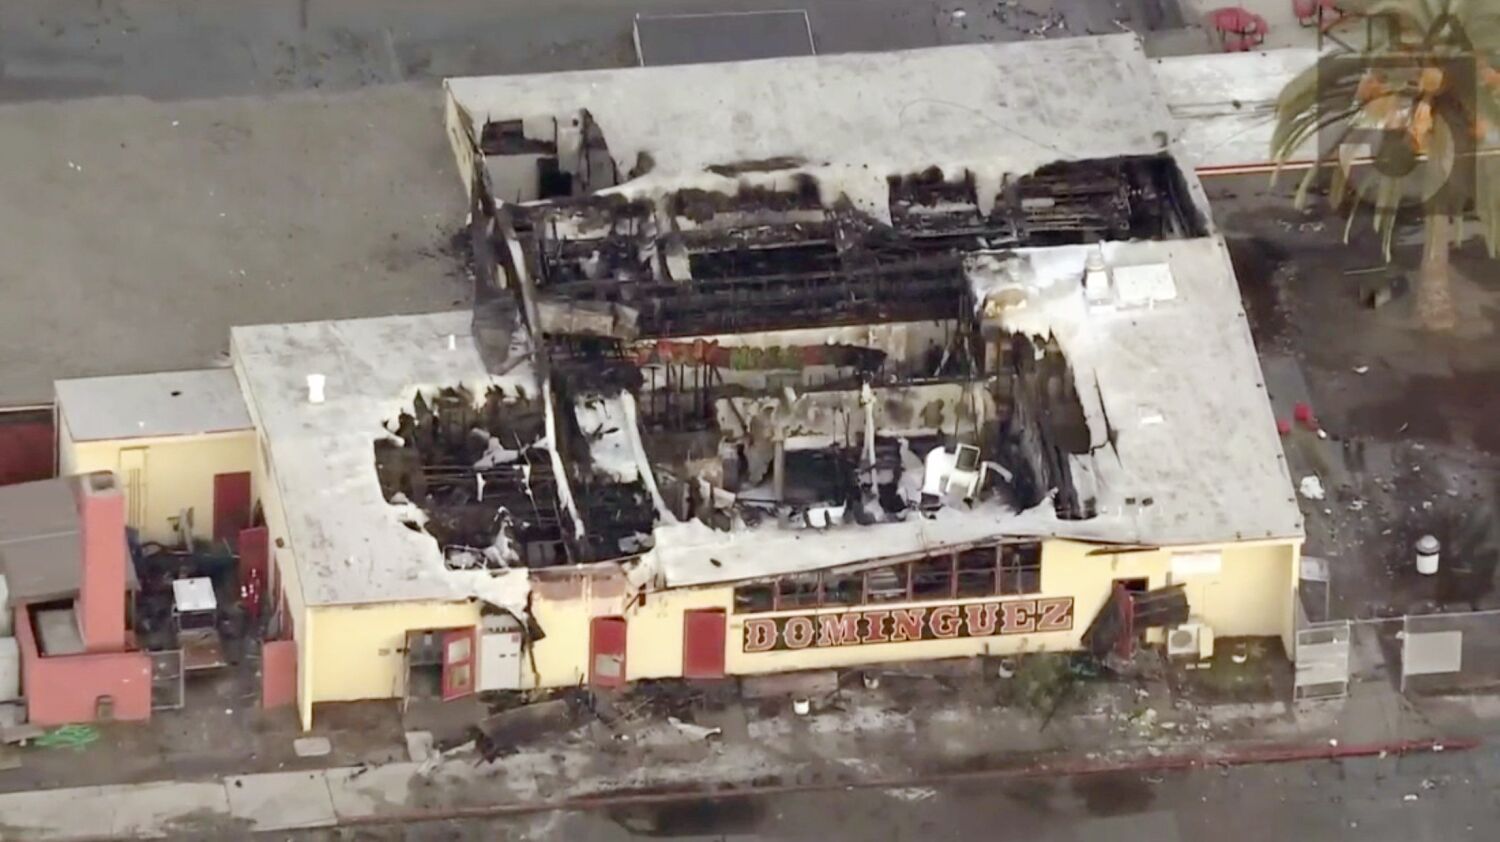 Classes canceled at Compton high school after fire destroys cafeteria